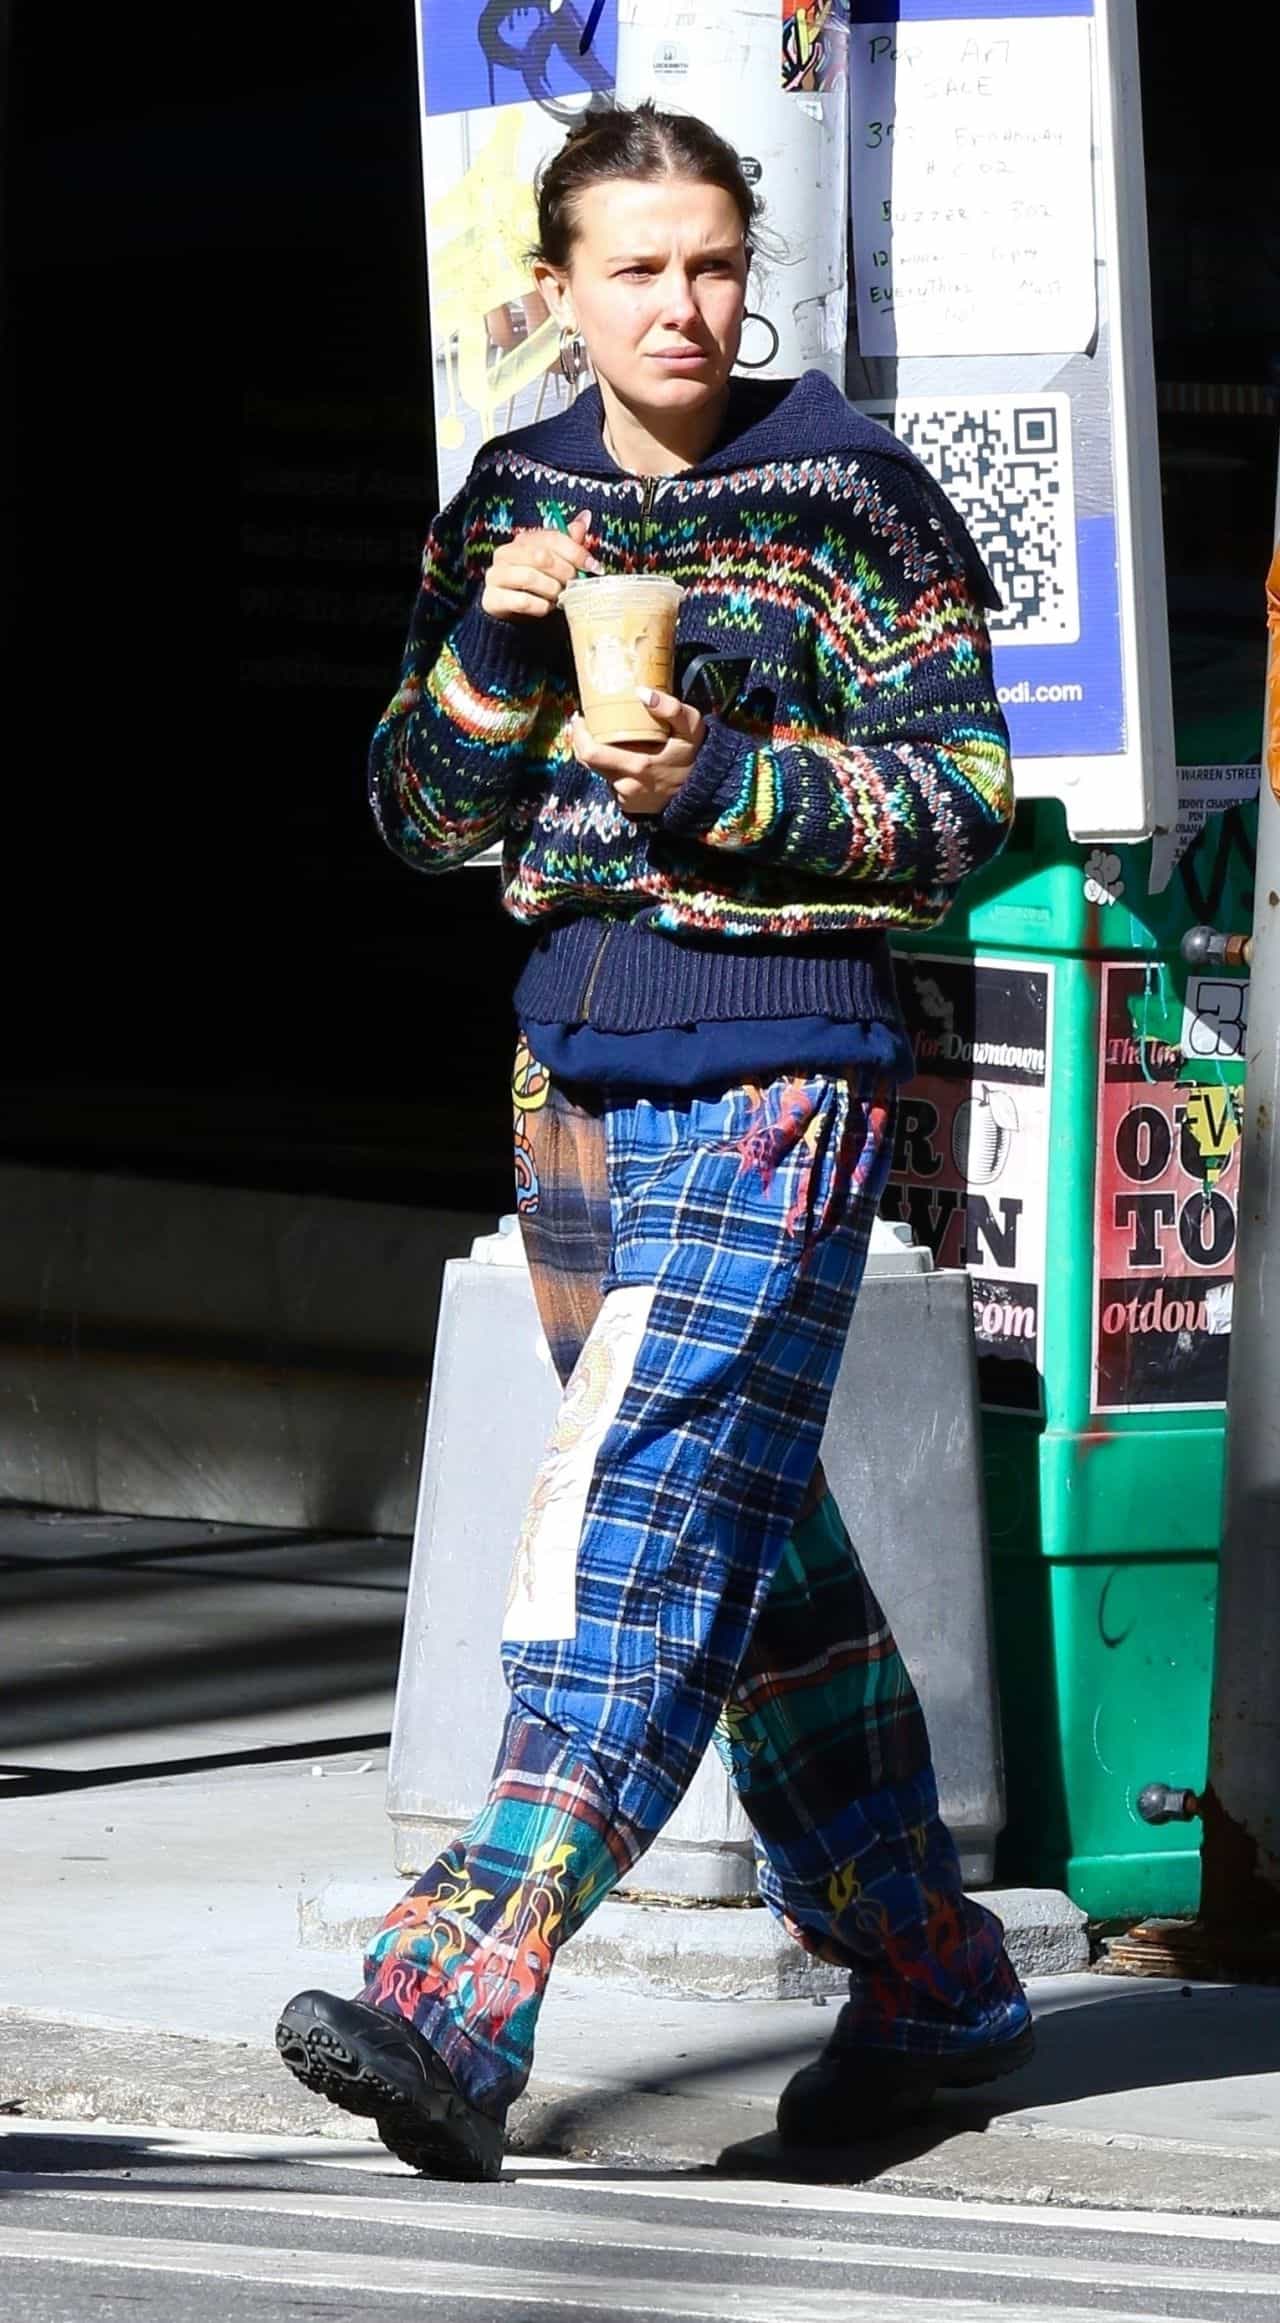 Millie Bobby Brown Radiates Casual Chic in Colorful Sweater and Plaid Pants